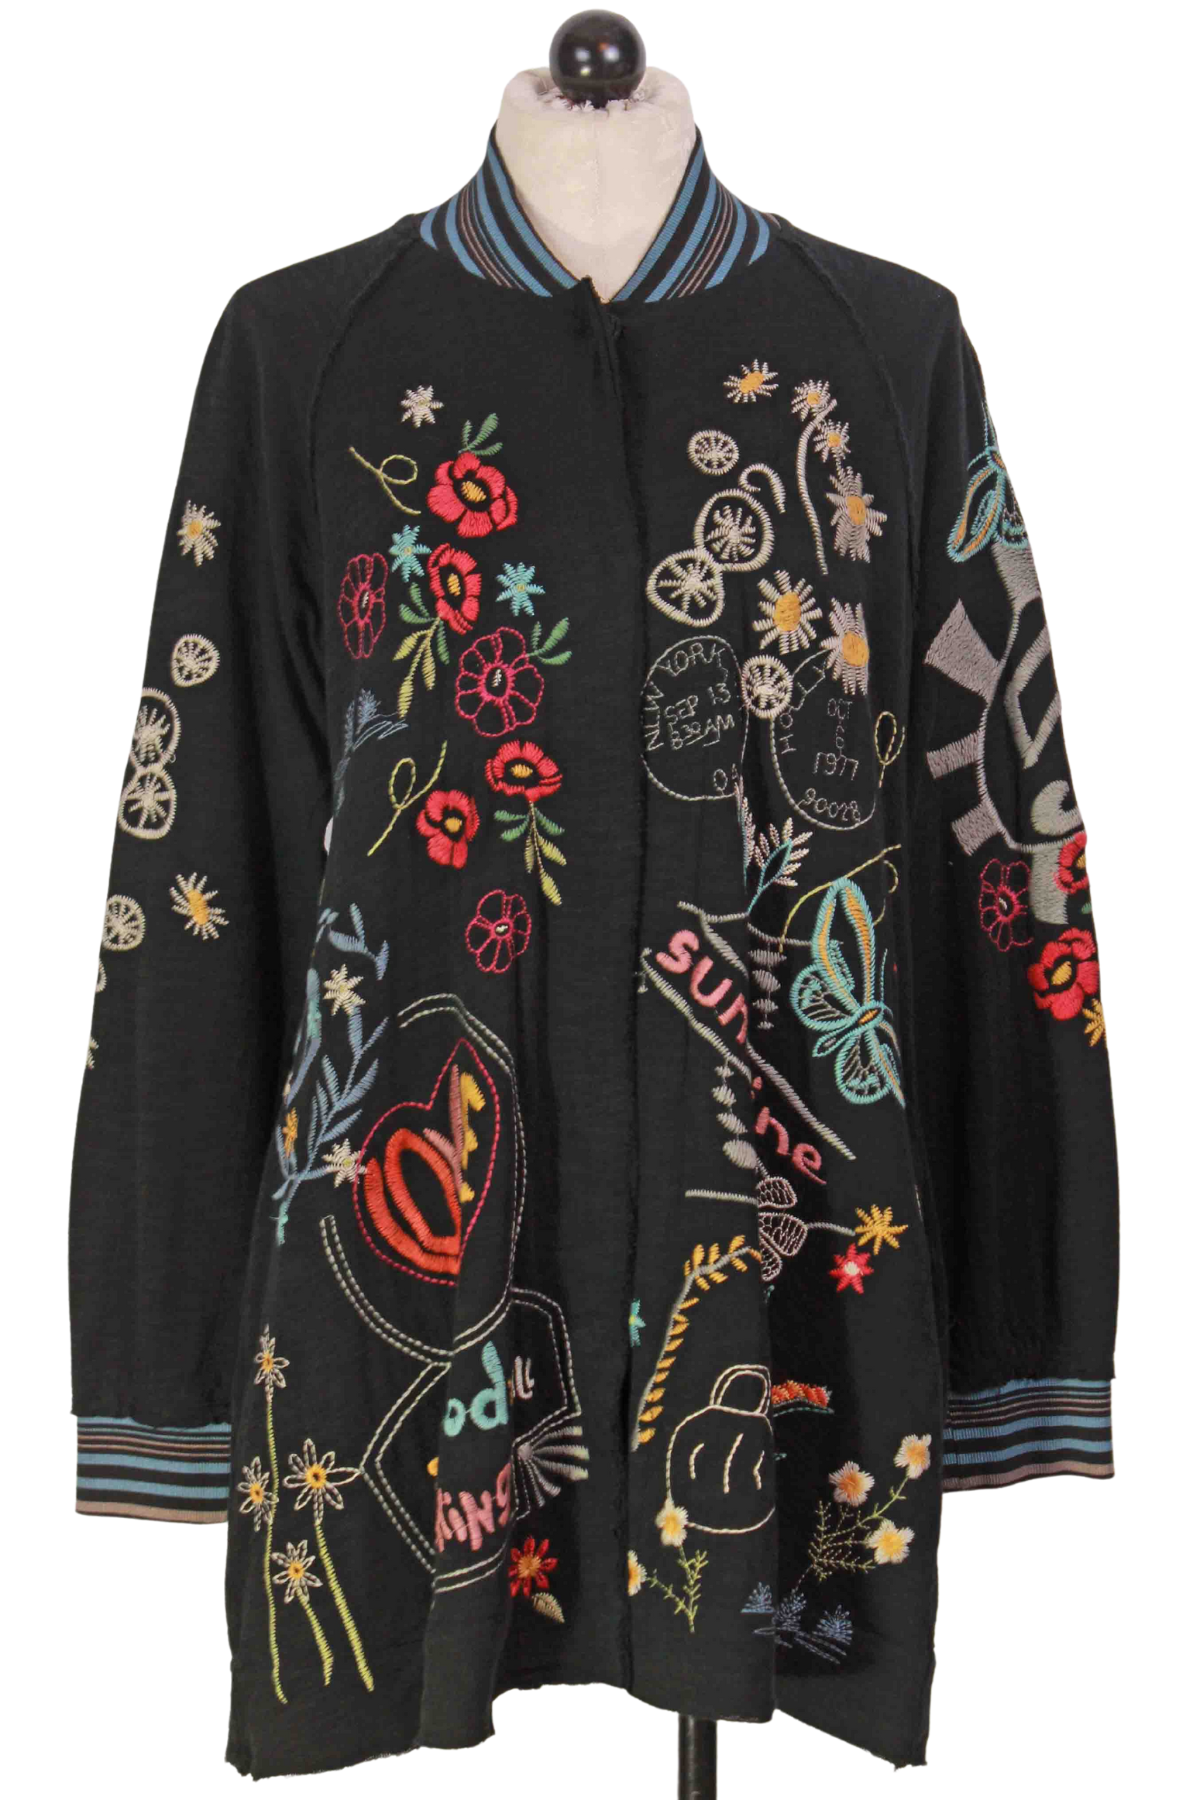 Black Merida Embroidered Jacket by Johnny Was